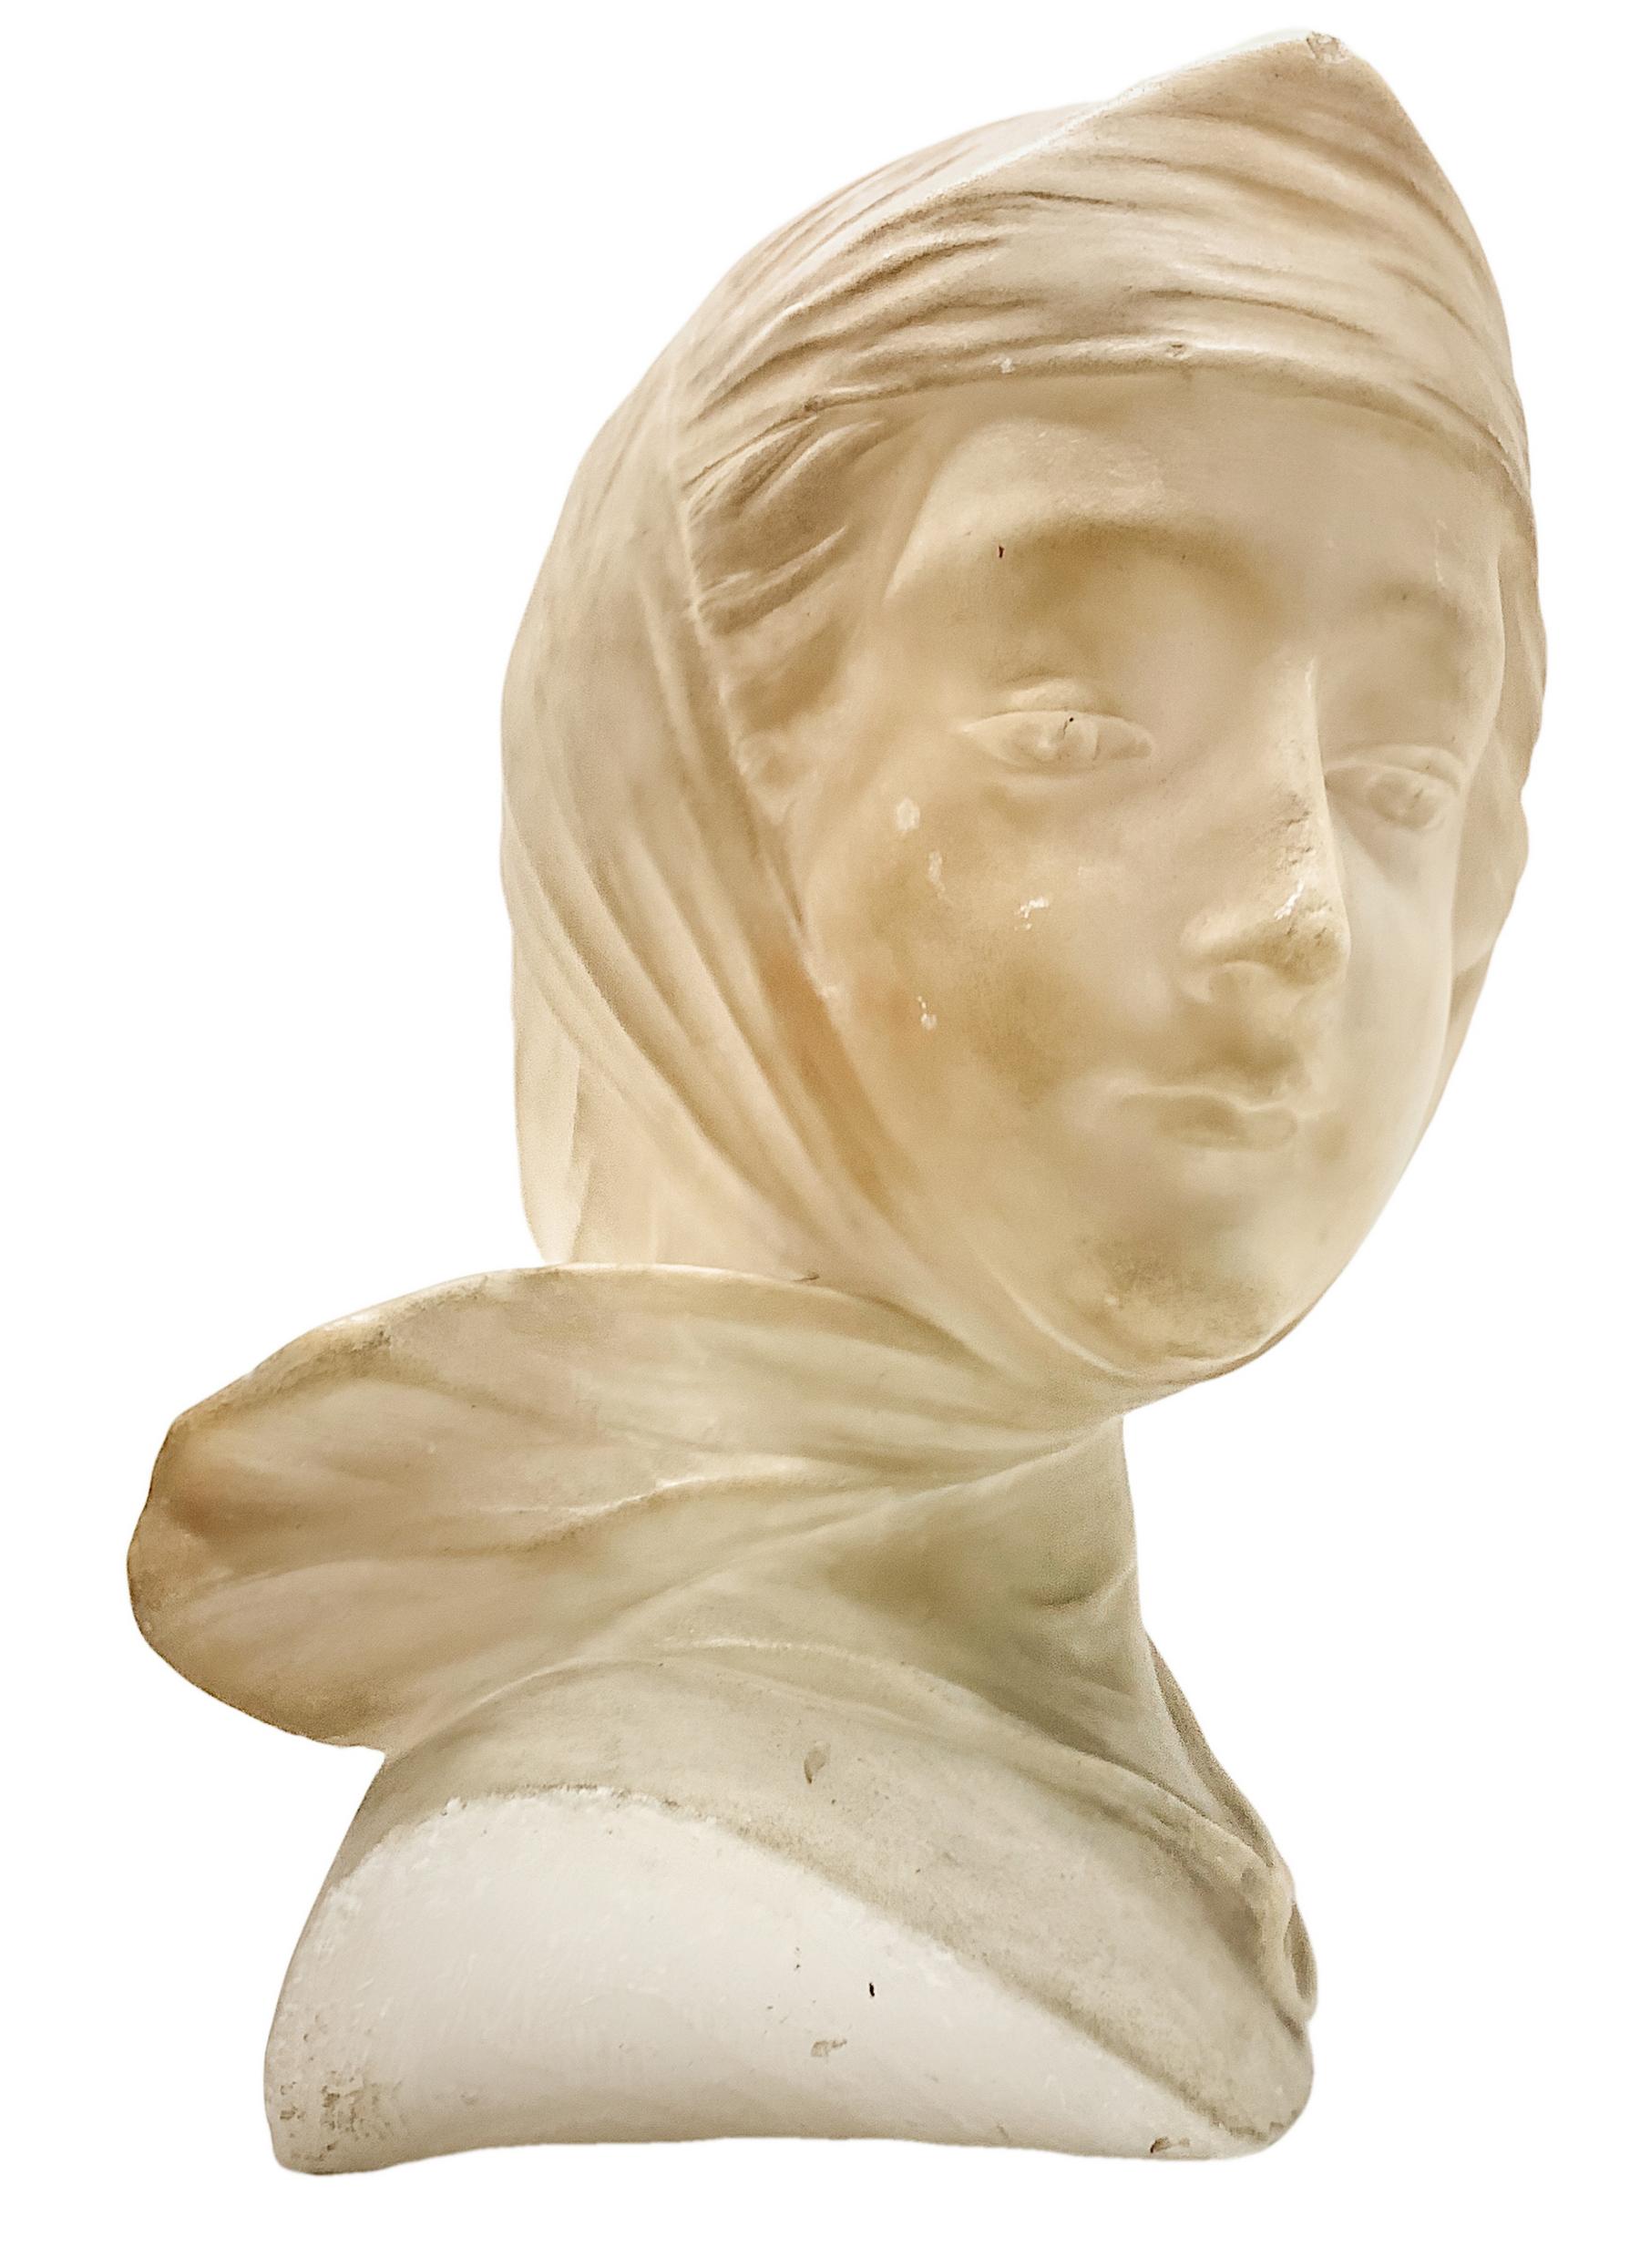 White marble statuette depicting a young woman with fulare head. H cm 19. Base 7x9 cm. - Image 3 of 6